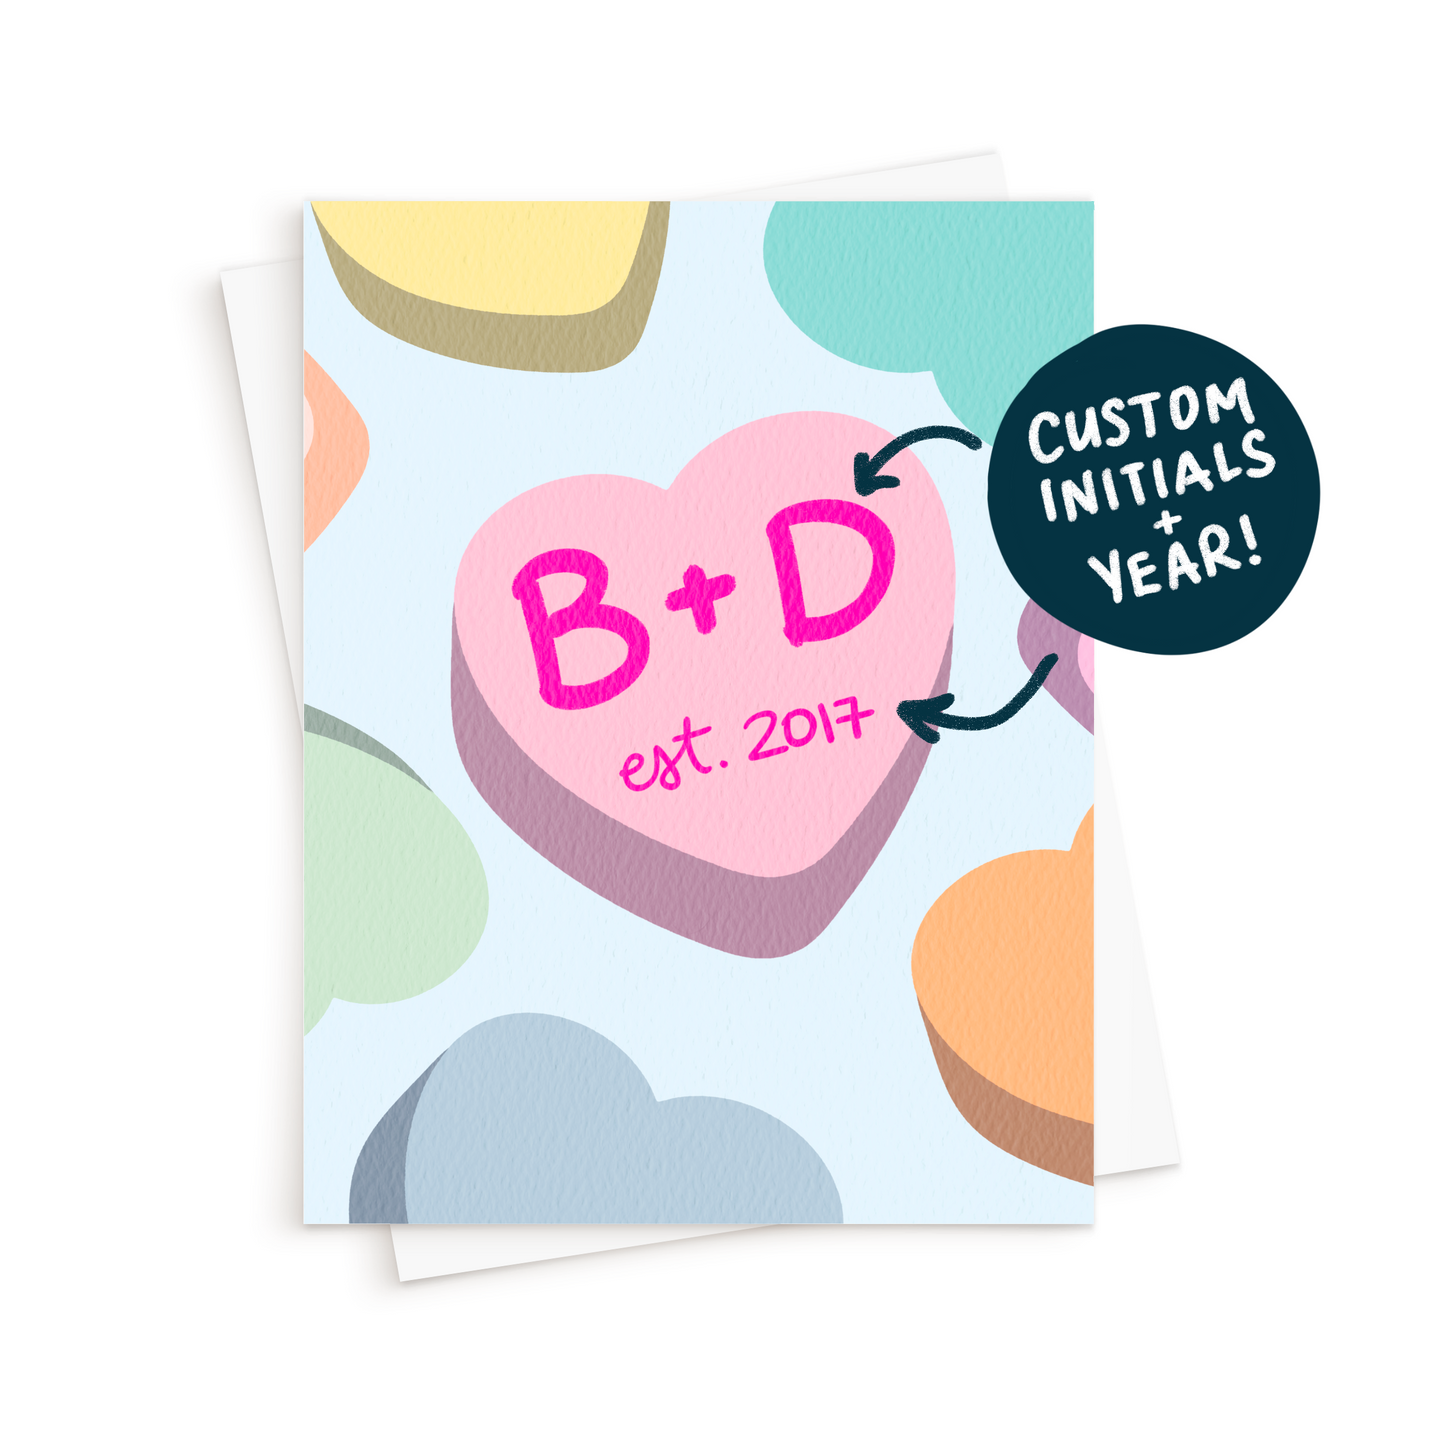 The Initials Candy Heart Card